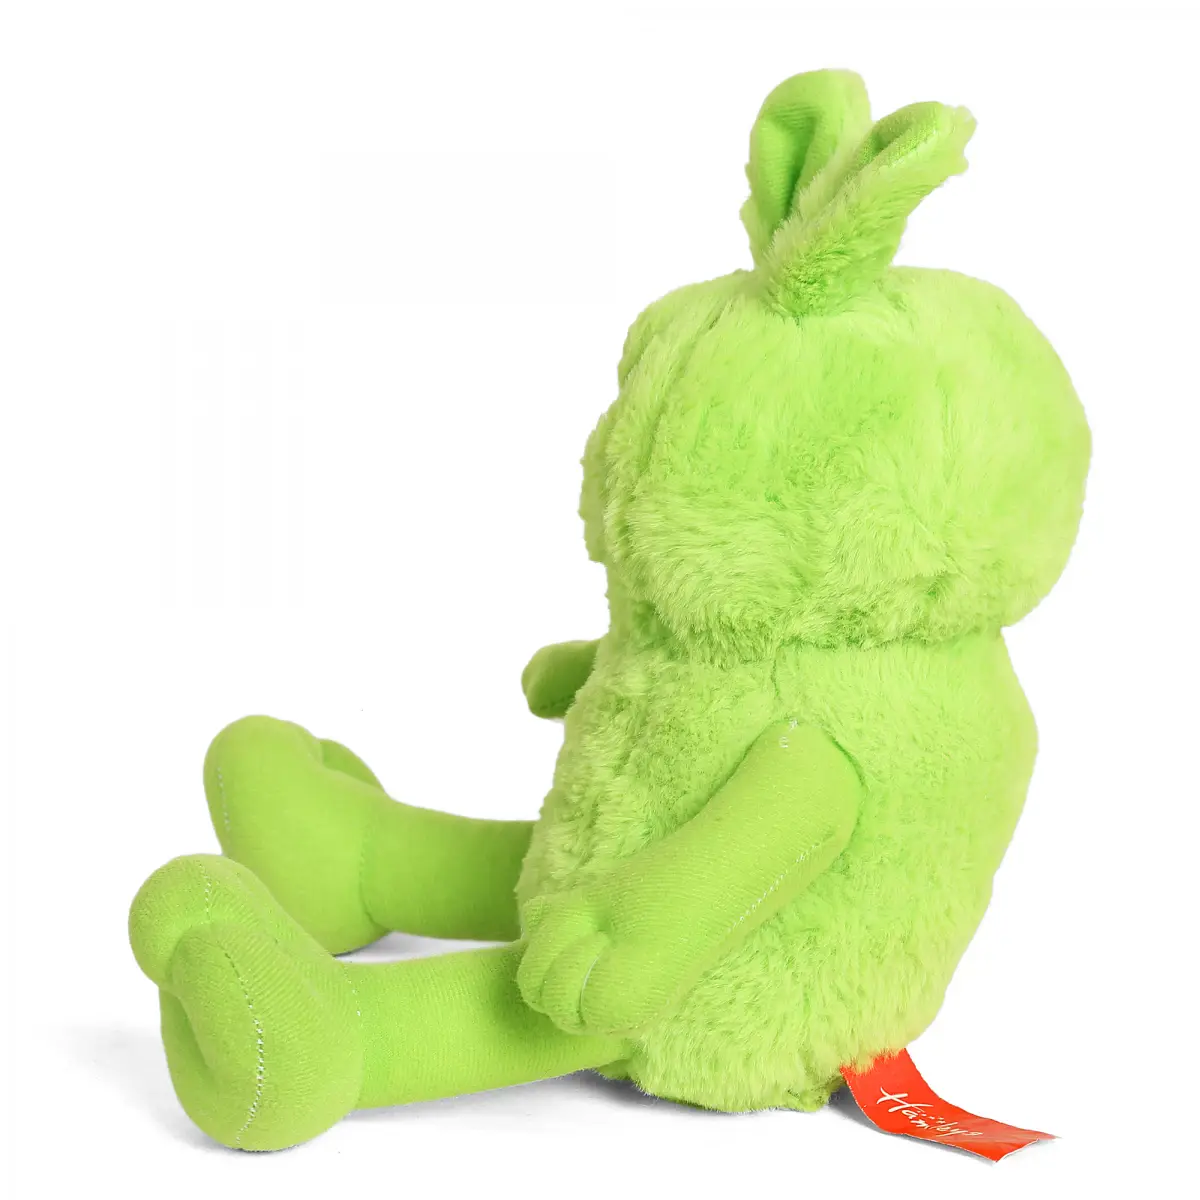 Hamleys Pap Ziggles Soft Toys for Kids, 3Y+, Green